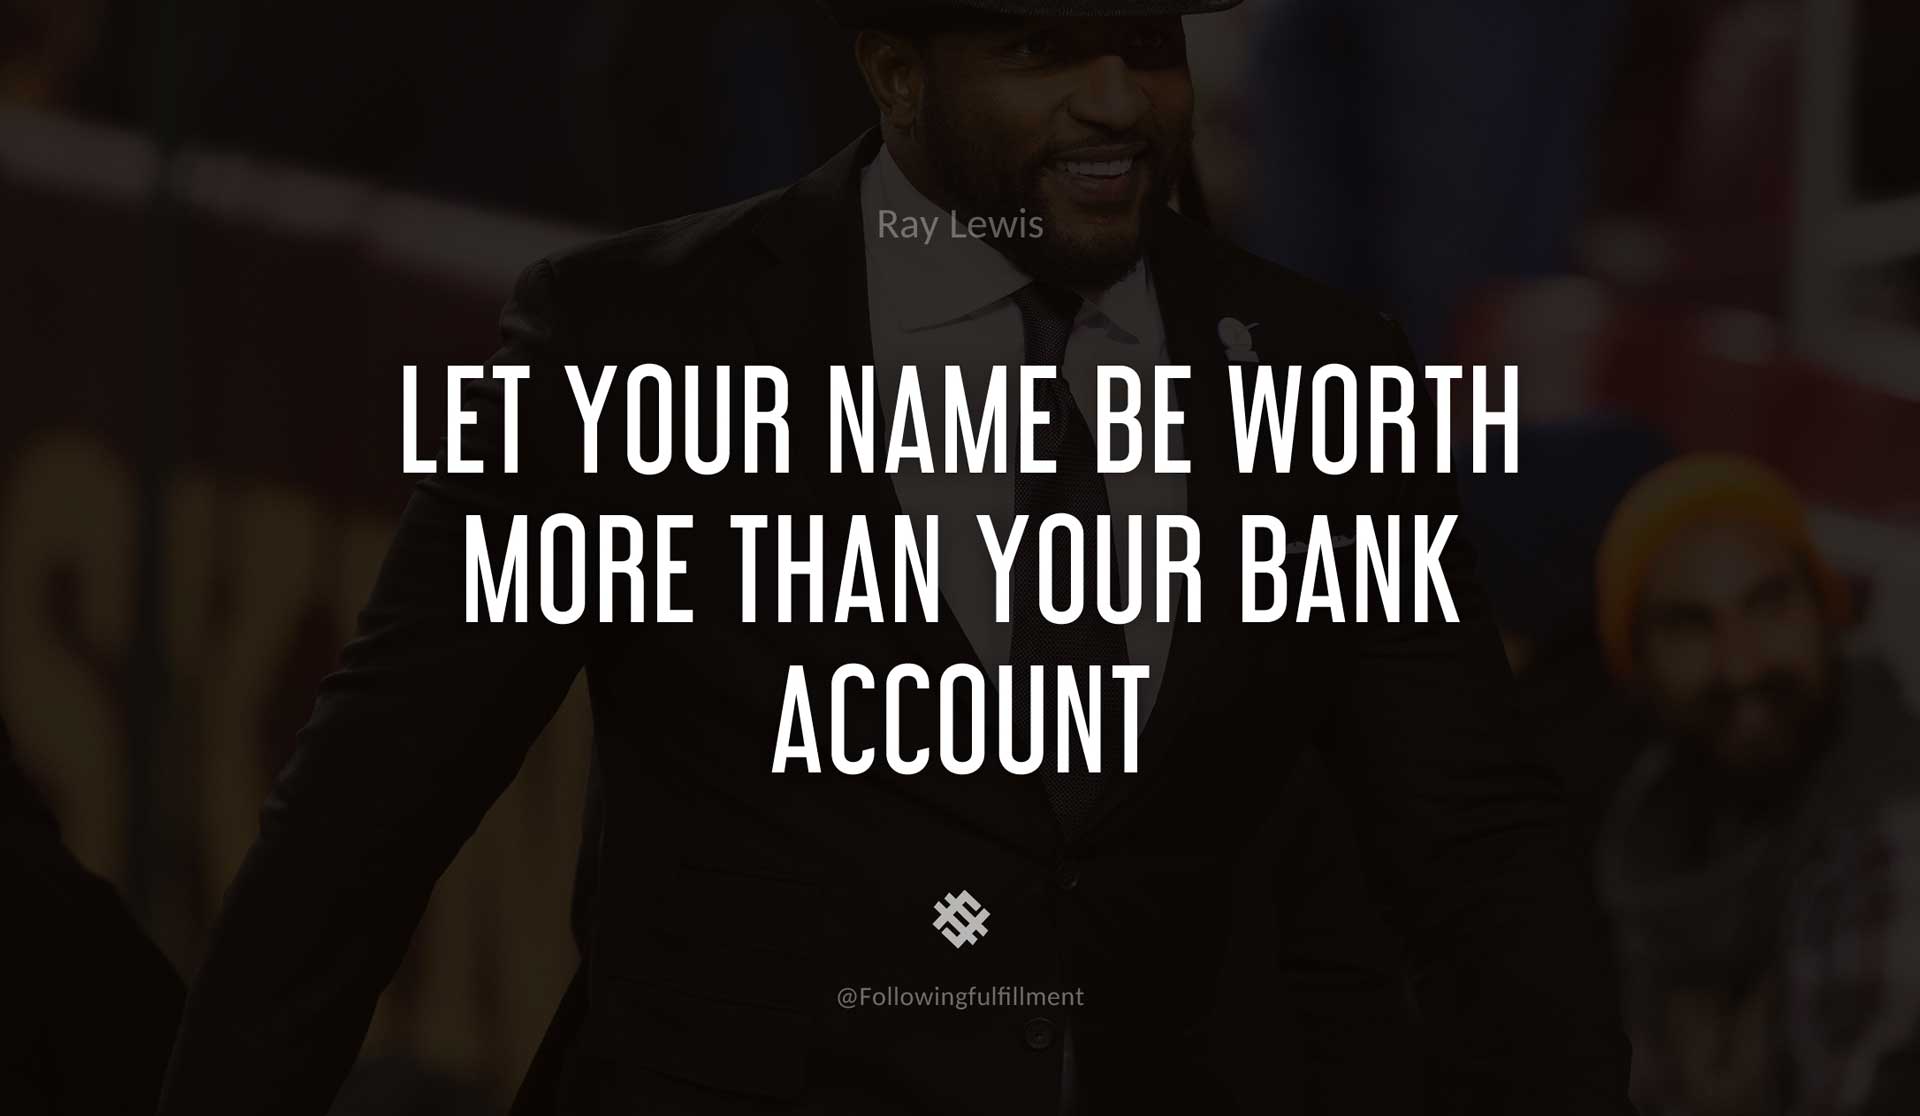 Let-your-name-be-worth-more-than-your-bank-account-RAY-LEWIS-Quote.jpg